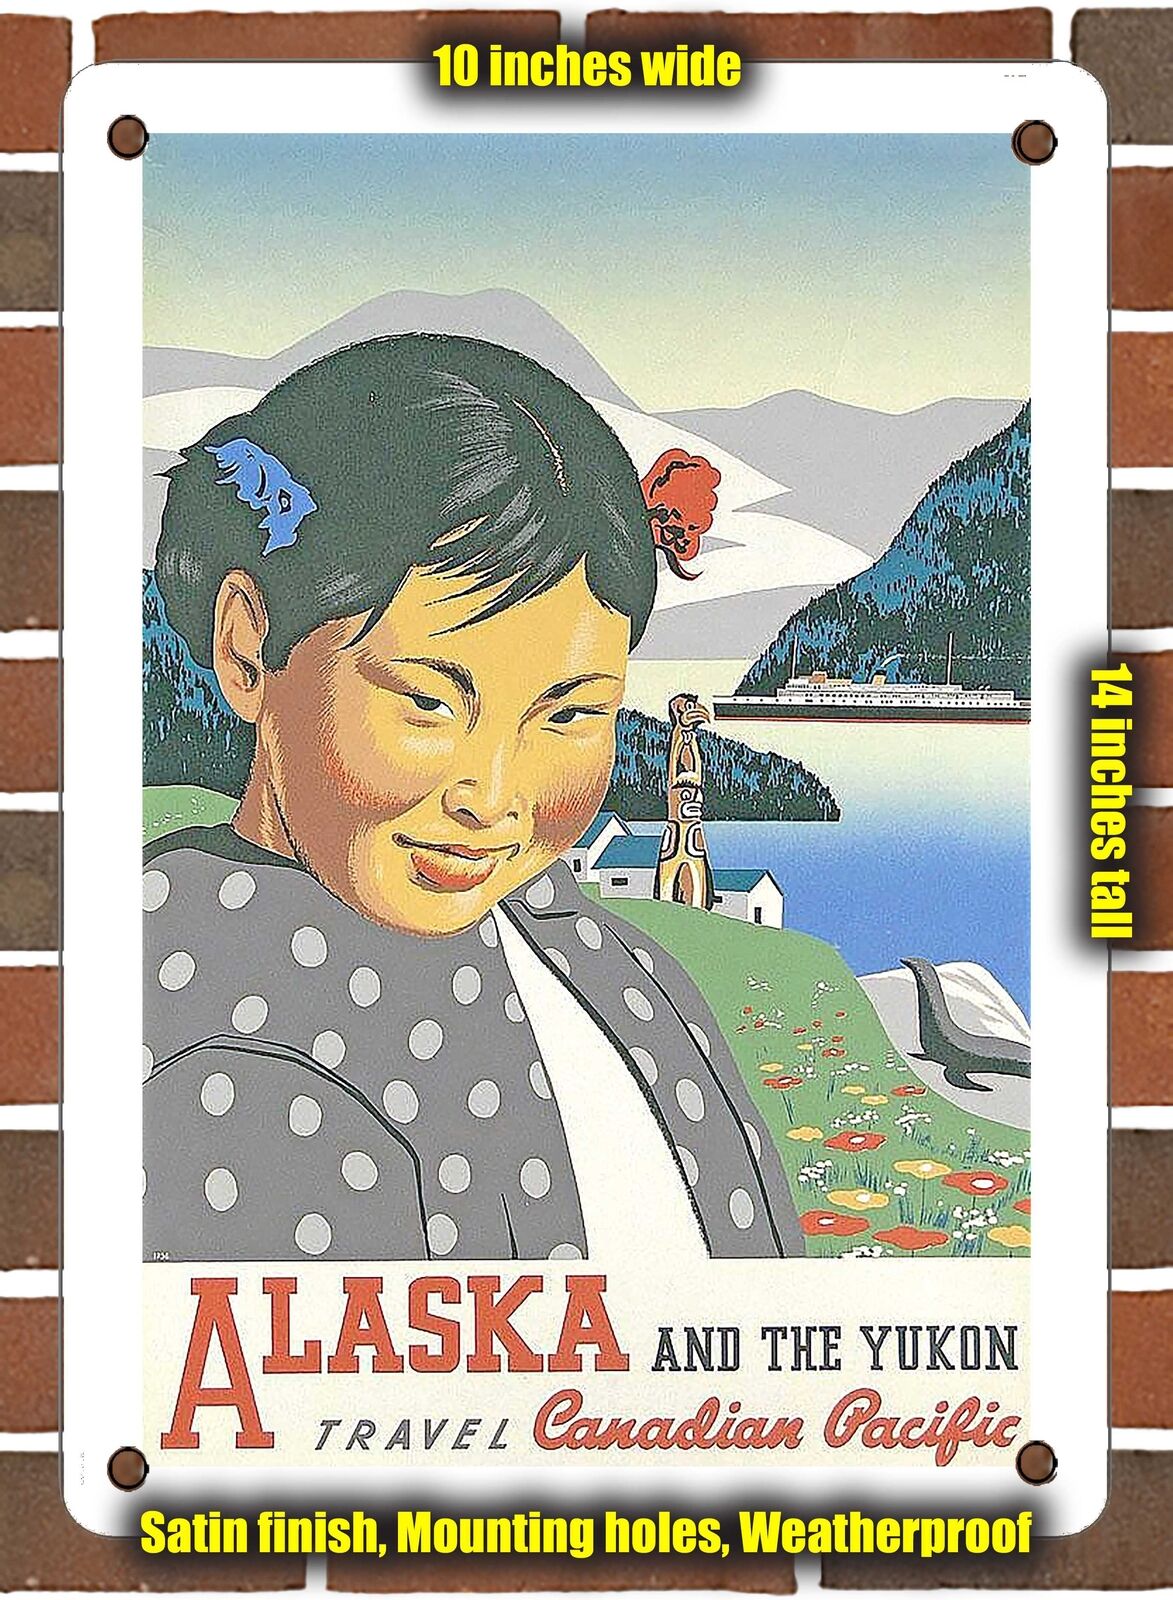 METAL SIGN - 1948 Alaska and the Yukon Travel Canadian Pacific - 10x14 Inches